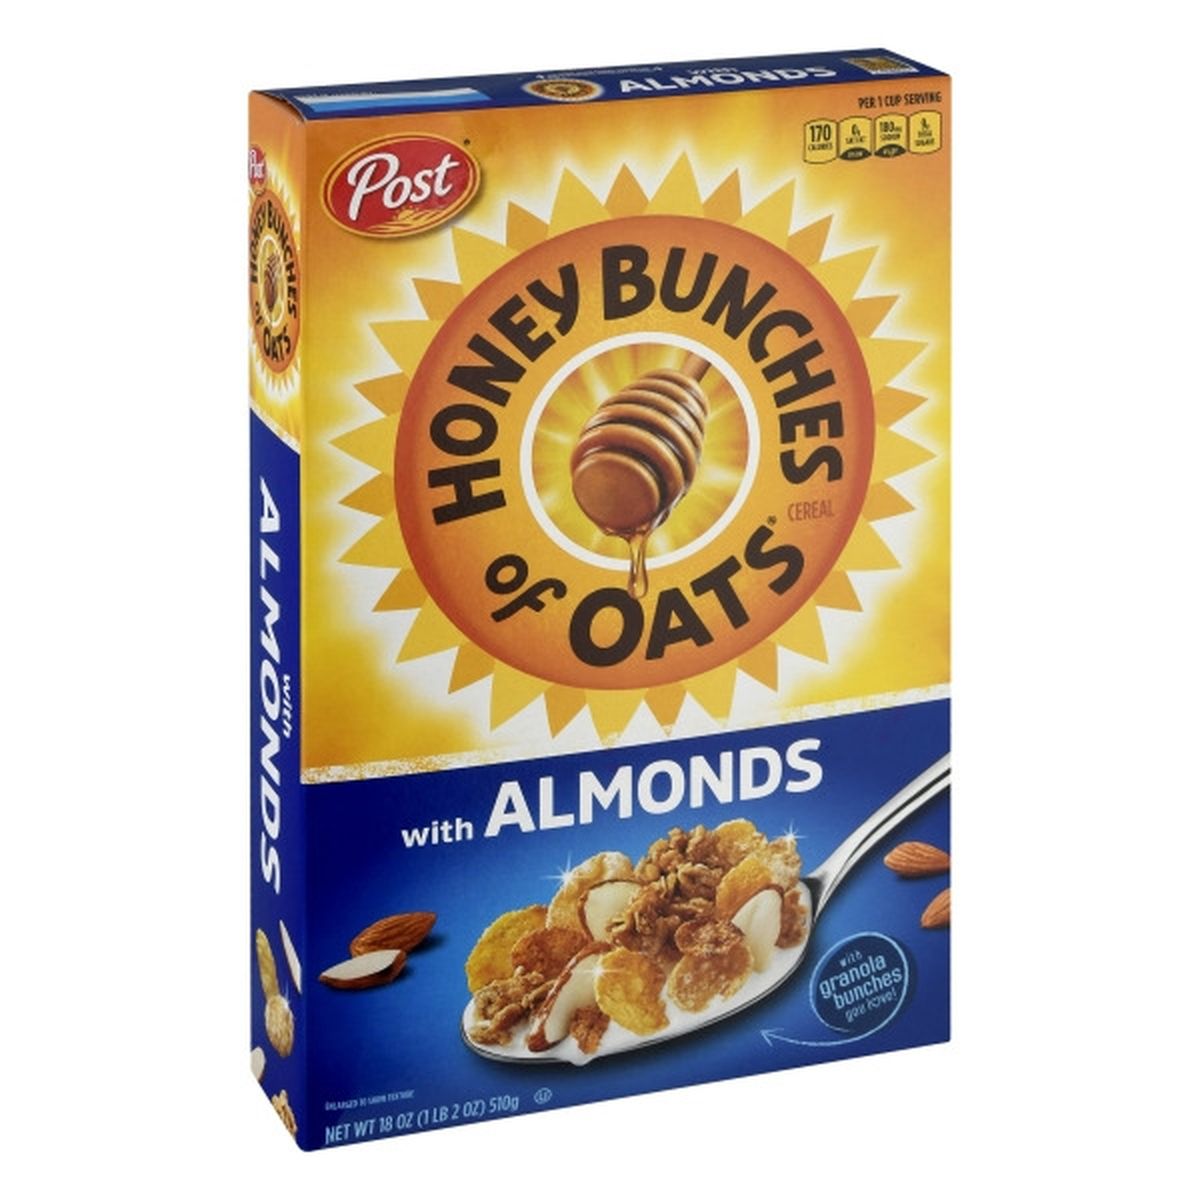 Calories in Post Cereal, with Almonds